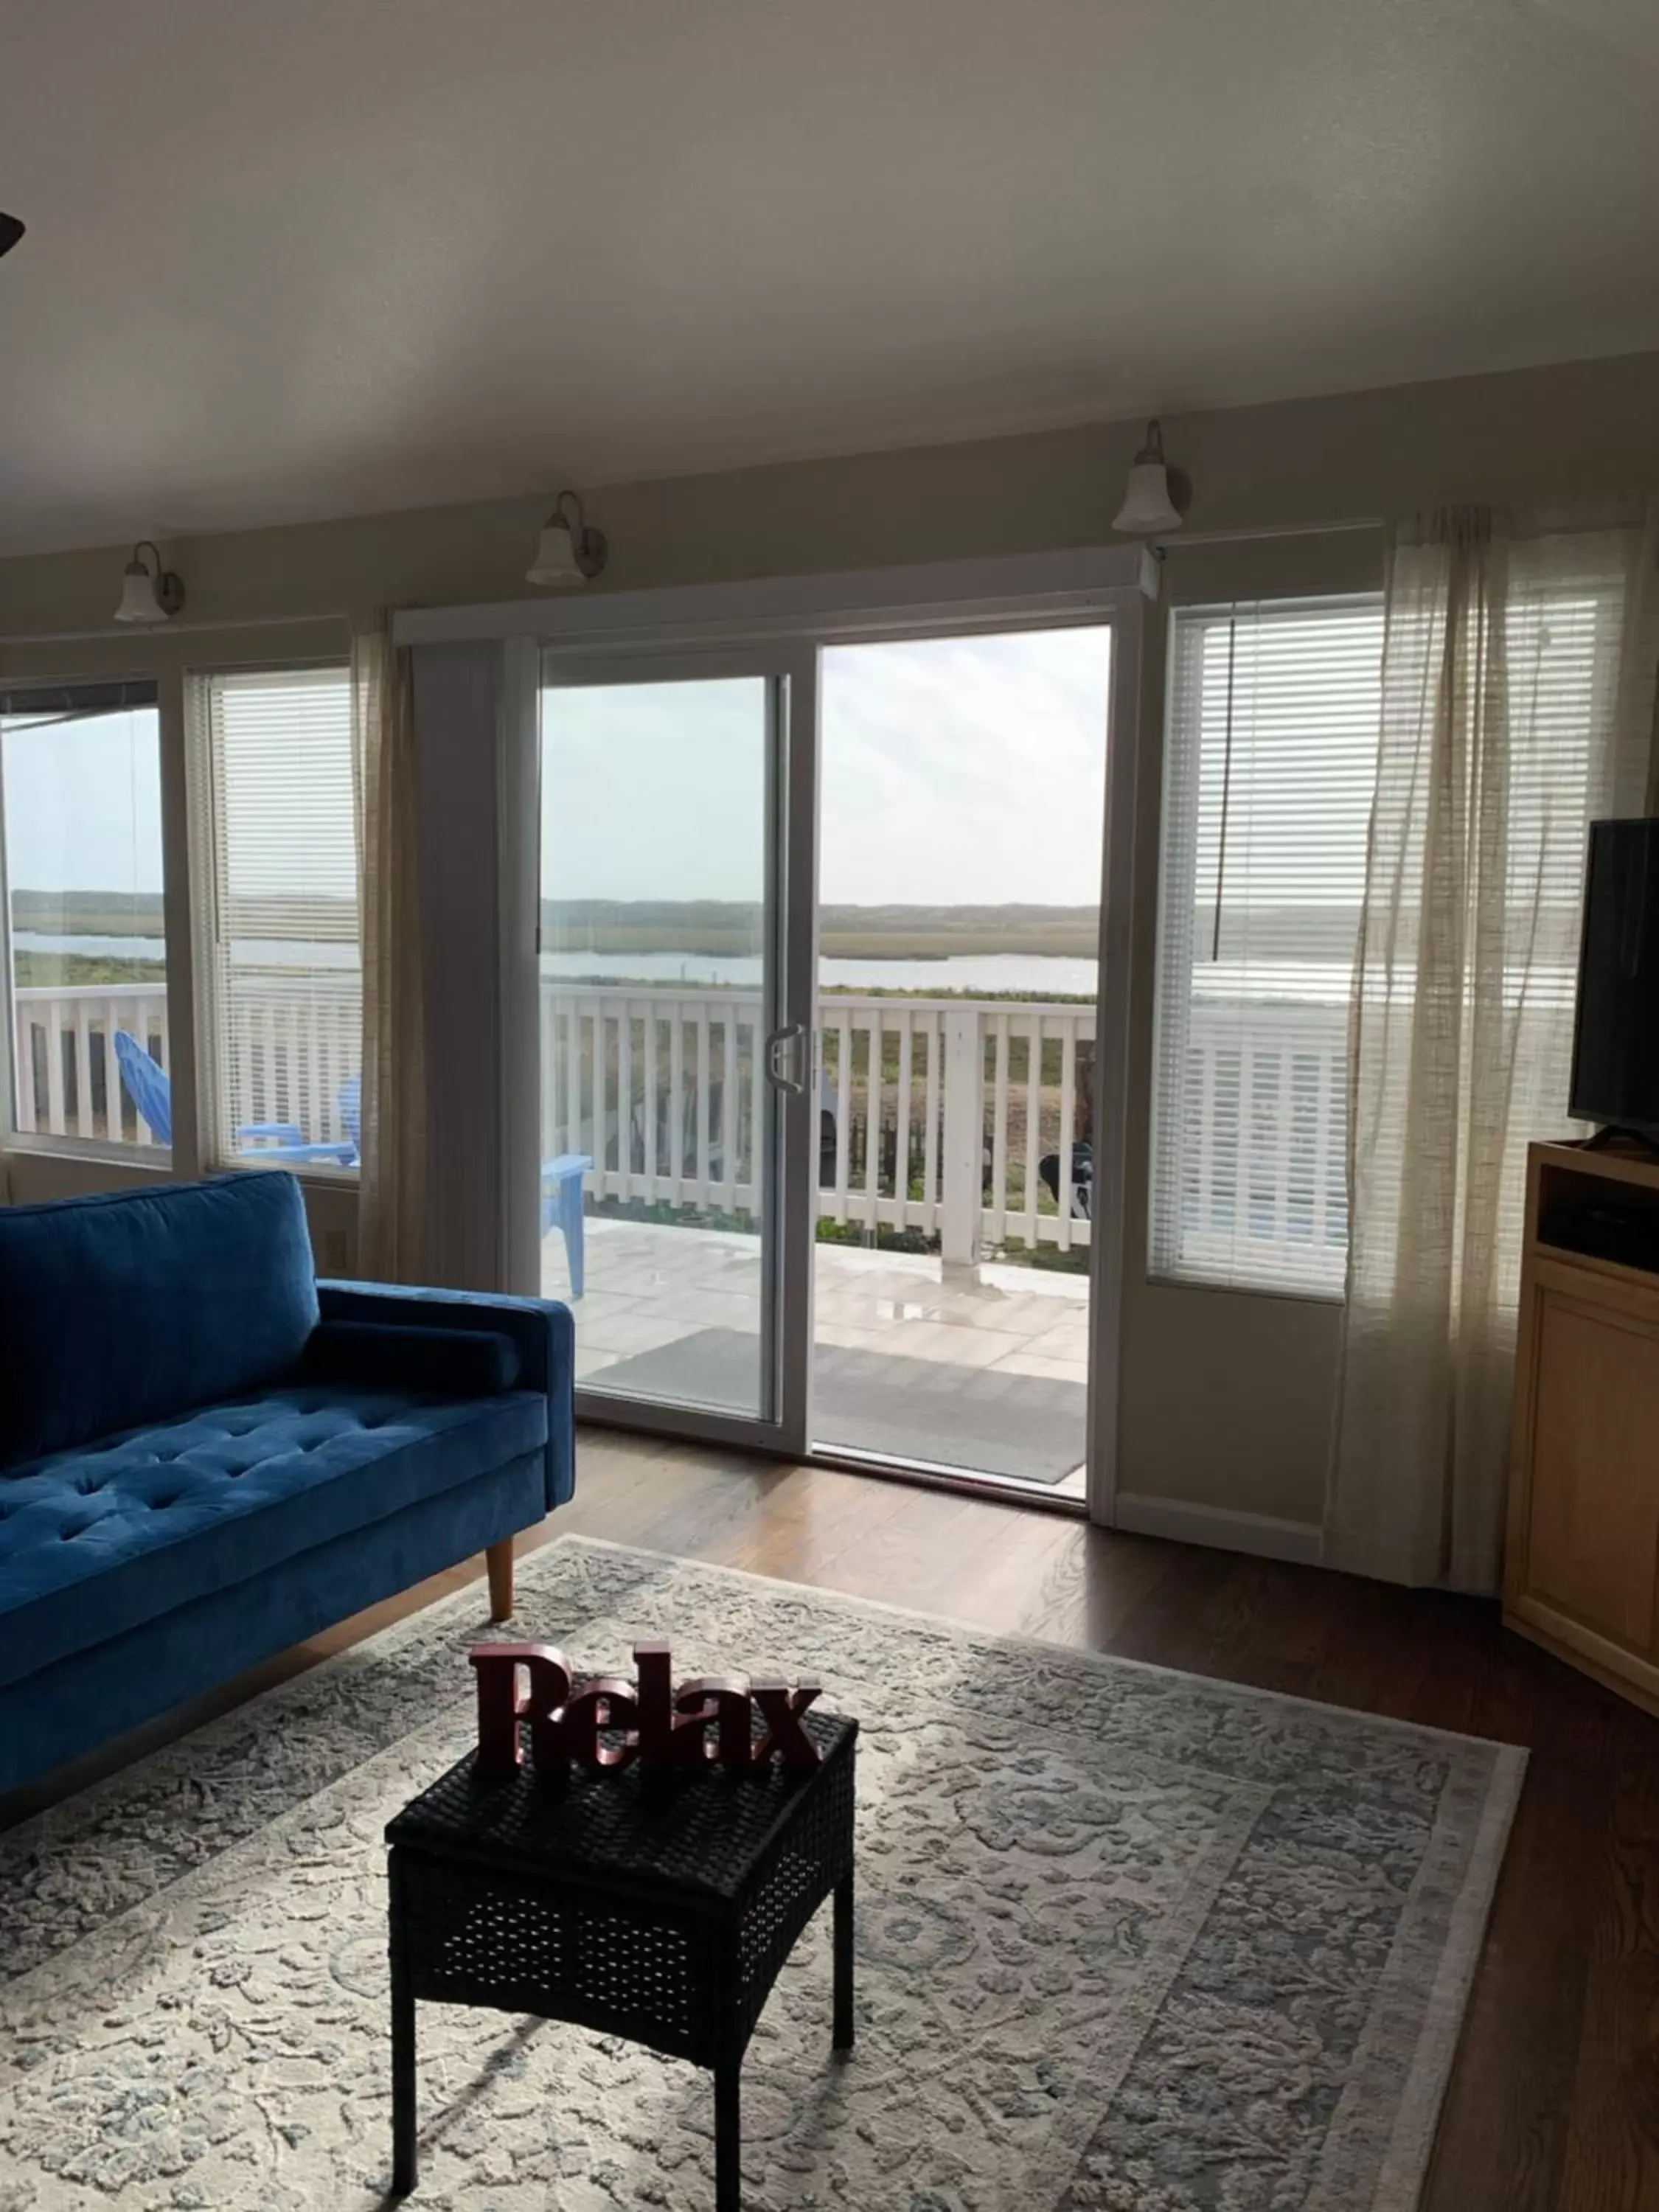 Apartment with Balcony in Captain's Inn at Moss Landing